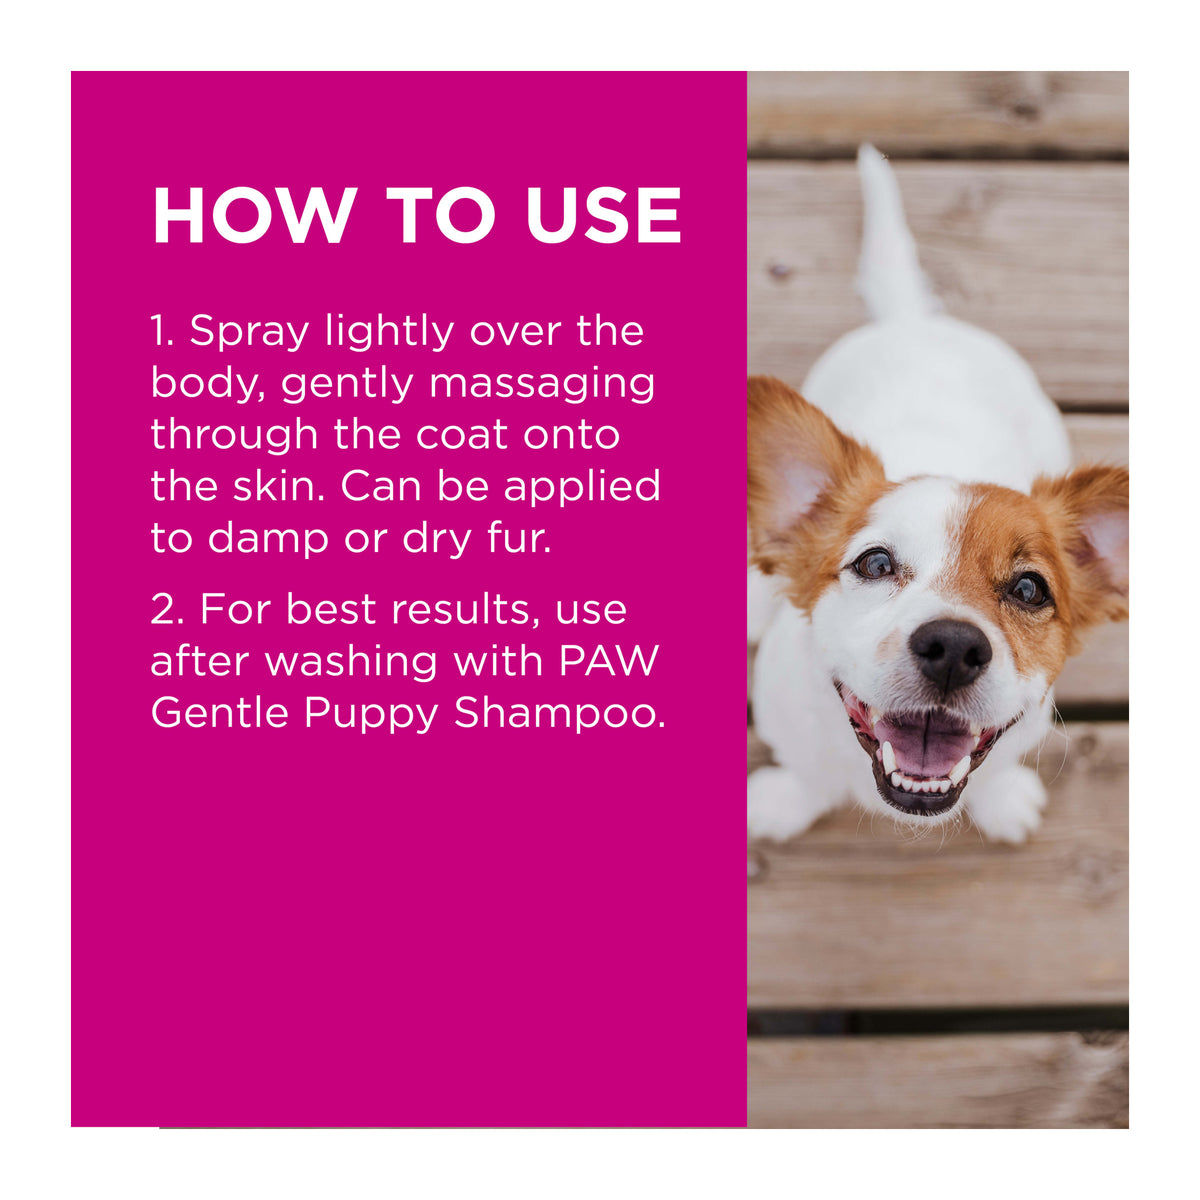 PAW Gentle Puppy Shampoo or Conditioning Spray